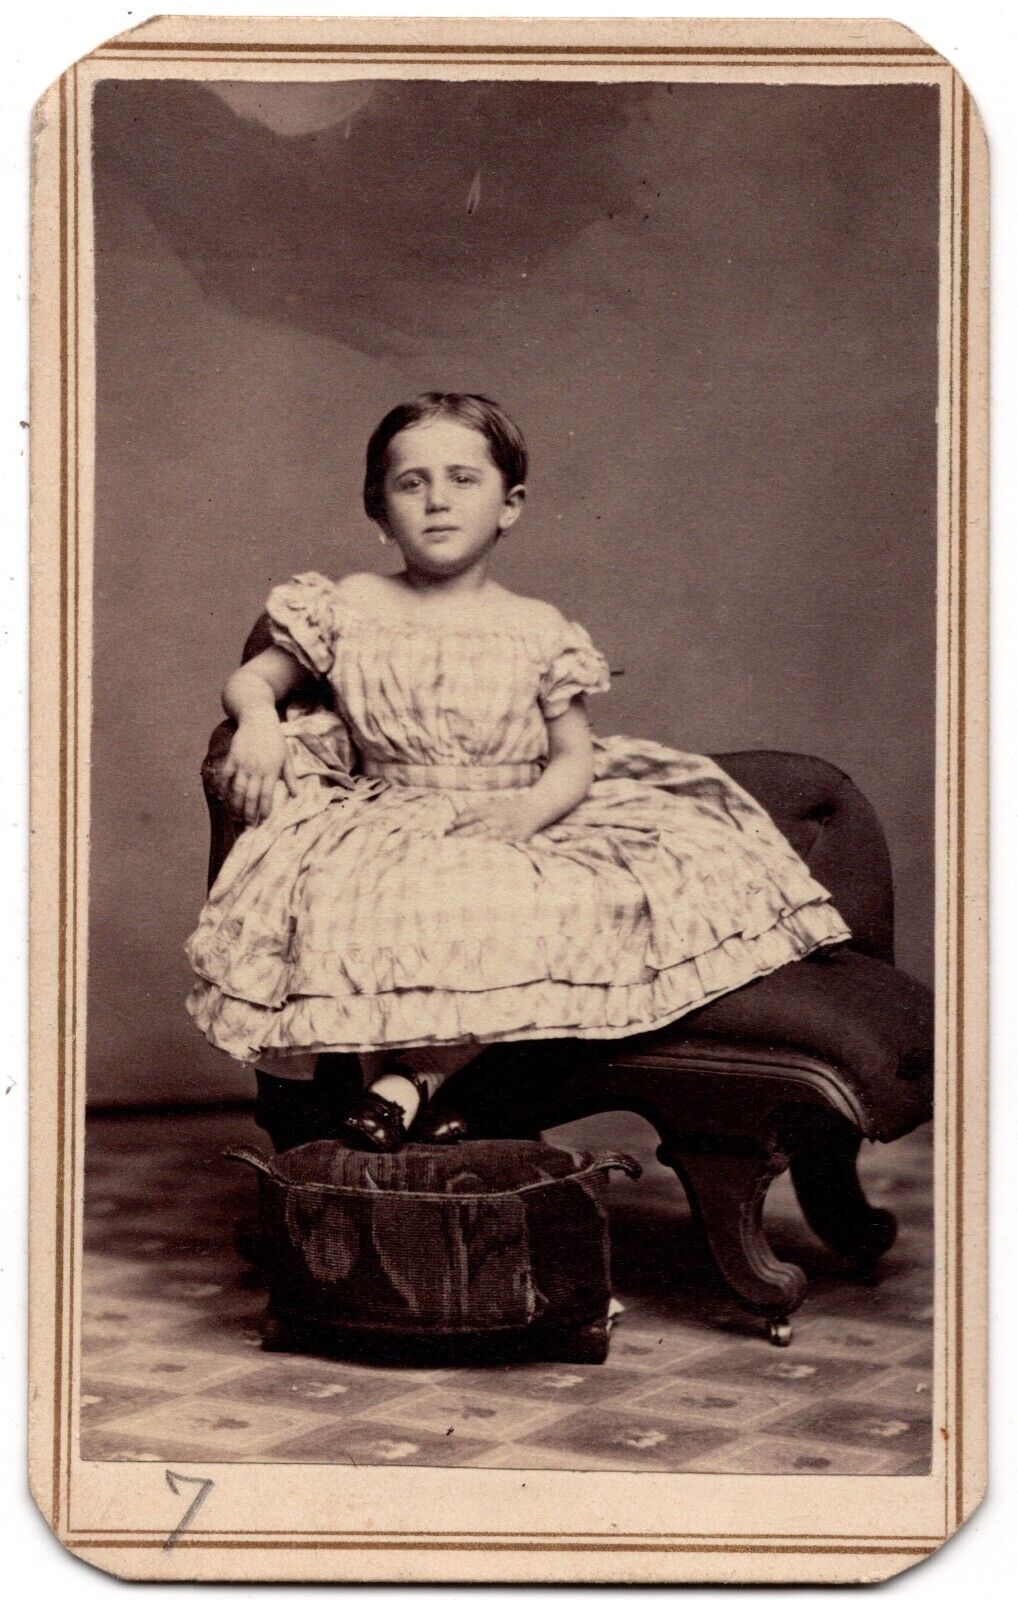 ANTIQUE CDV C. 1860s CUTE GIRL DIED AT 12 FROM NEURALGIA FREDERICK MARYLAND